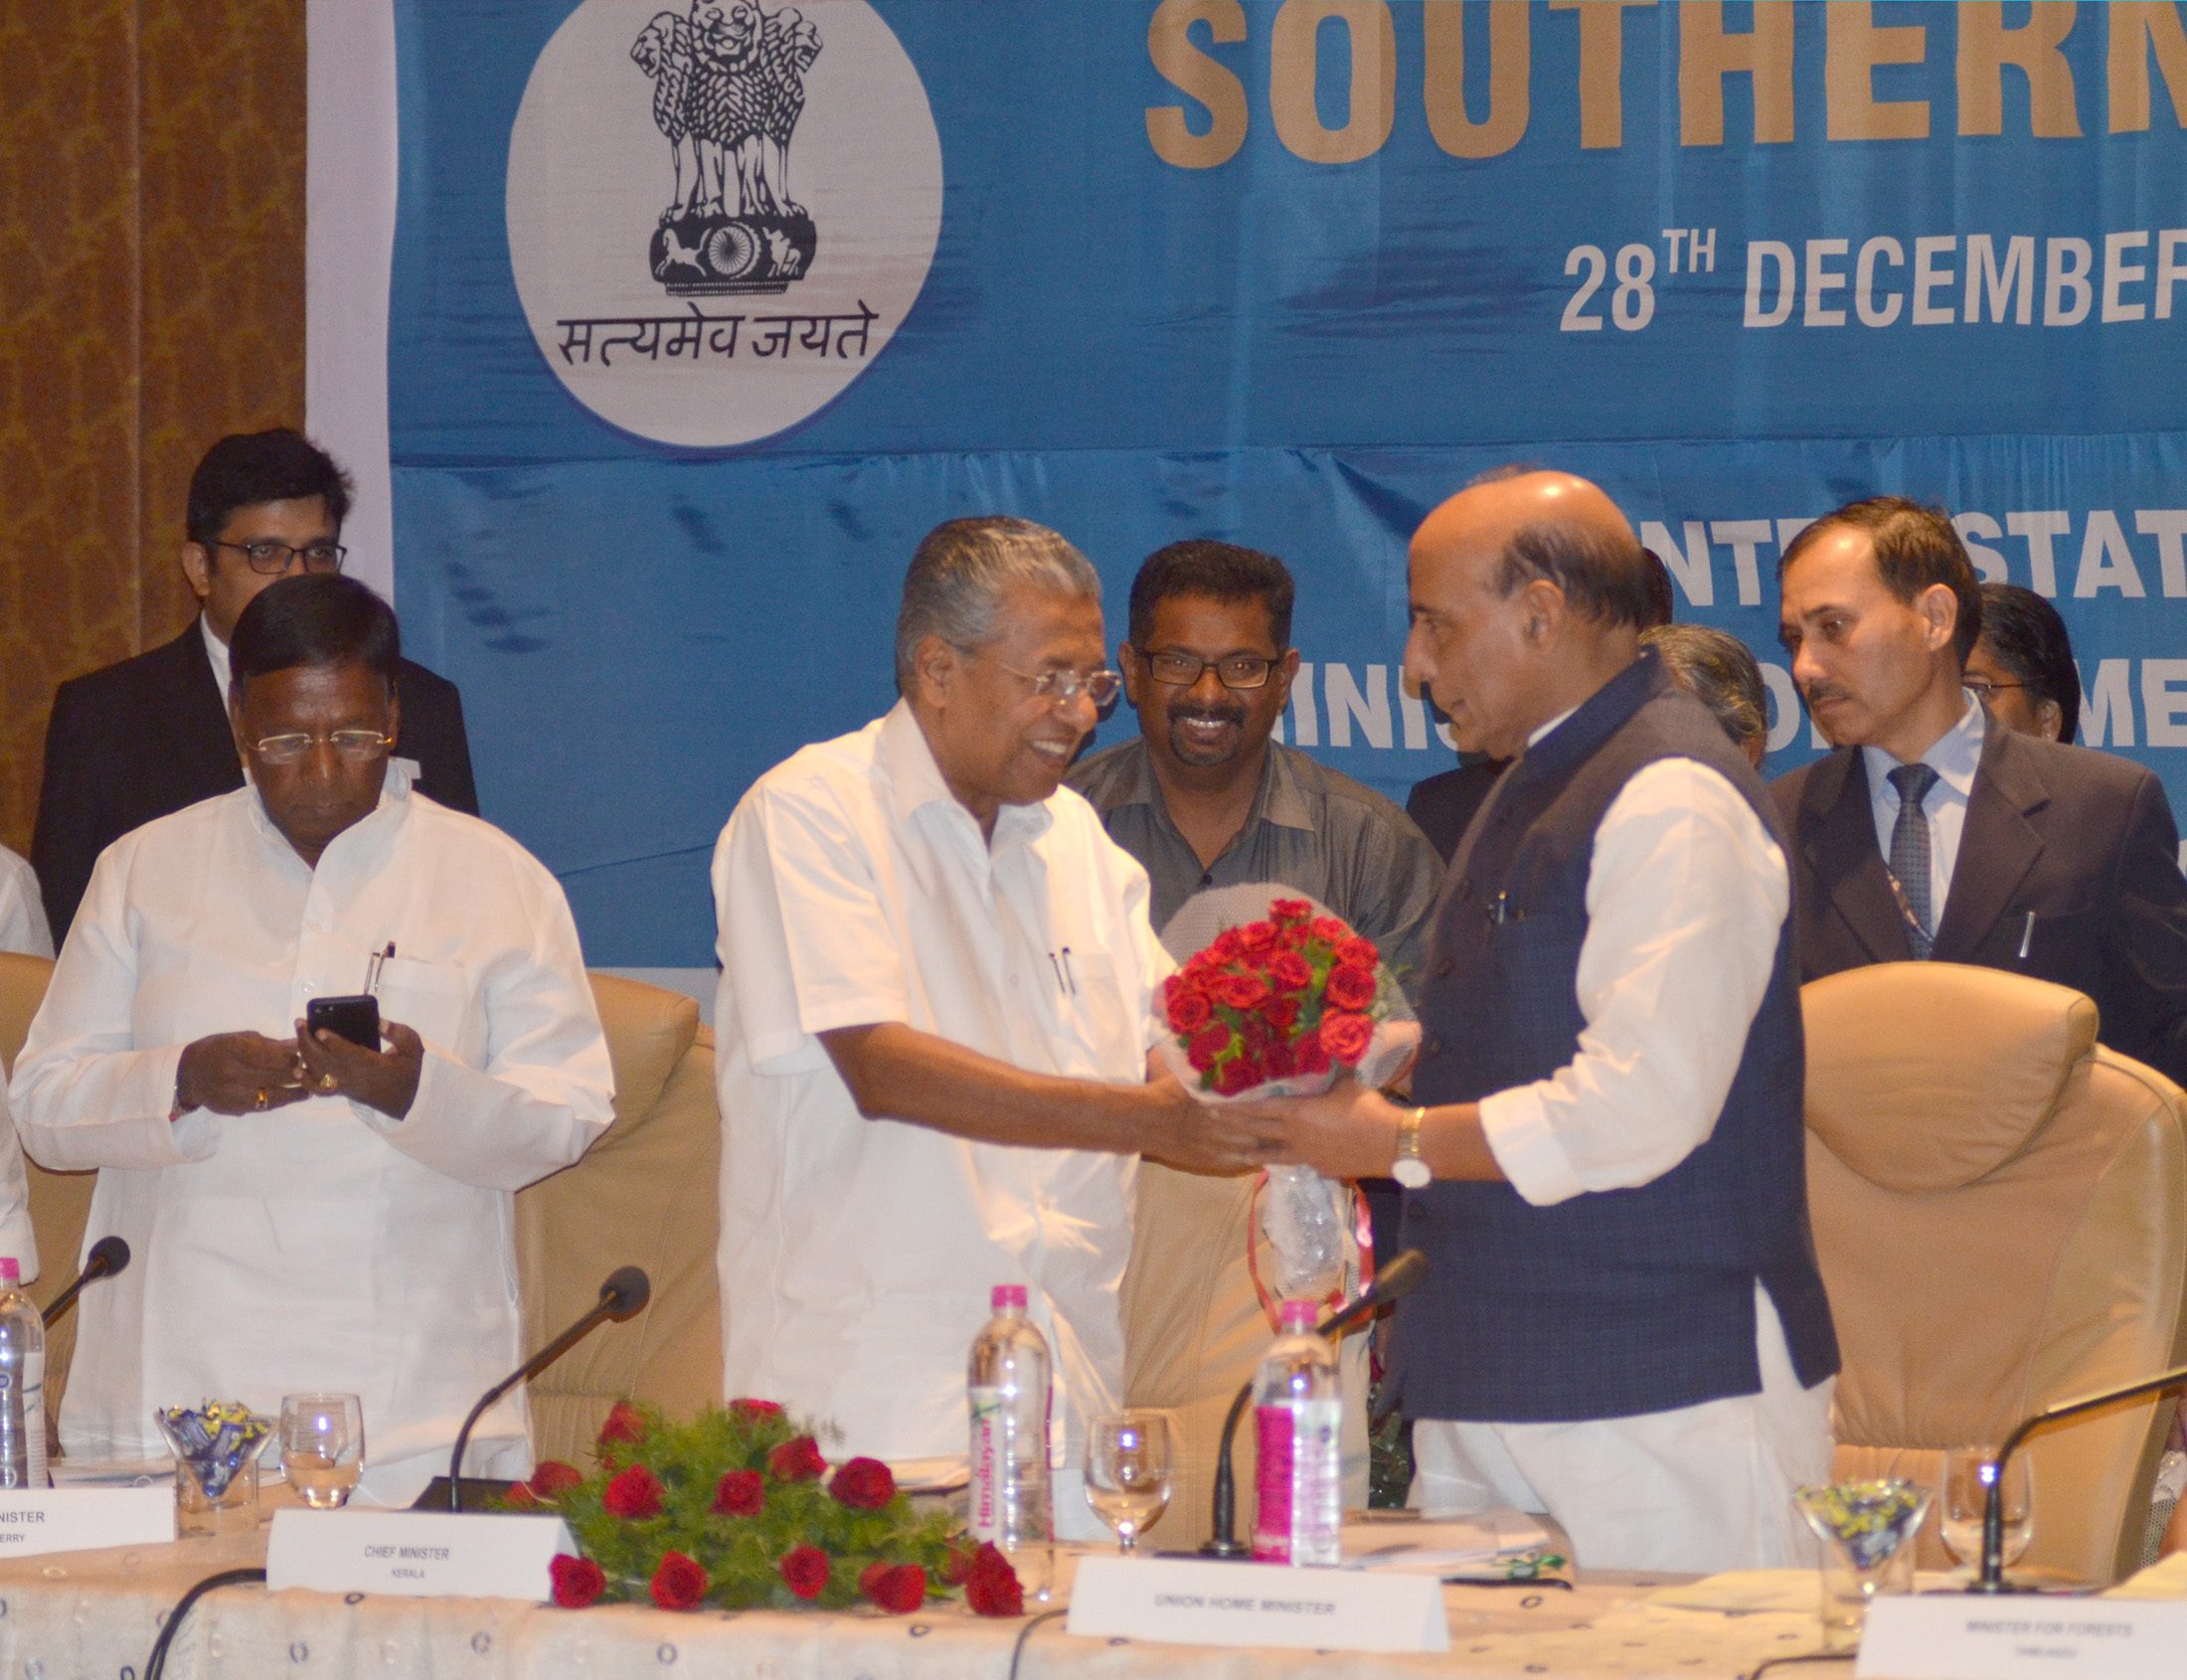 The Chief Minister of Kerala, Shri Pinarayi Vijayan welcoming the Union Home Minister, Shri Rajnath Singh at the 27th Southern Zonal Council meeting, in Thiruvananthapuram on December 28, 2016. The Chief Minister of Puducherry, Shri V. Narayanasamy is also seen.